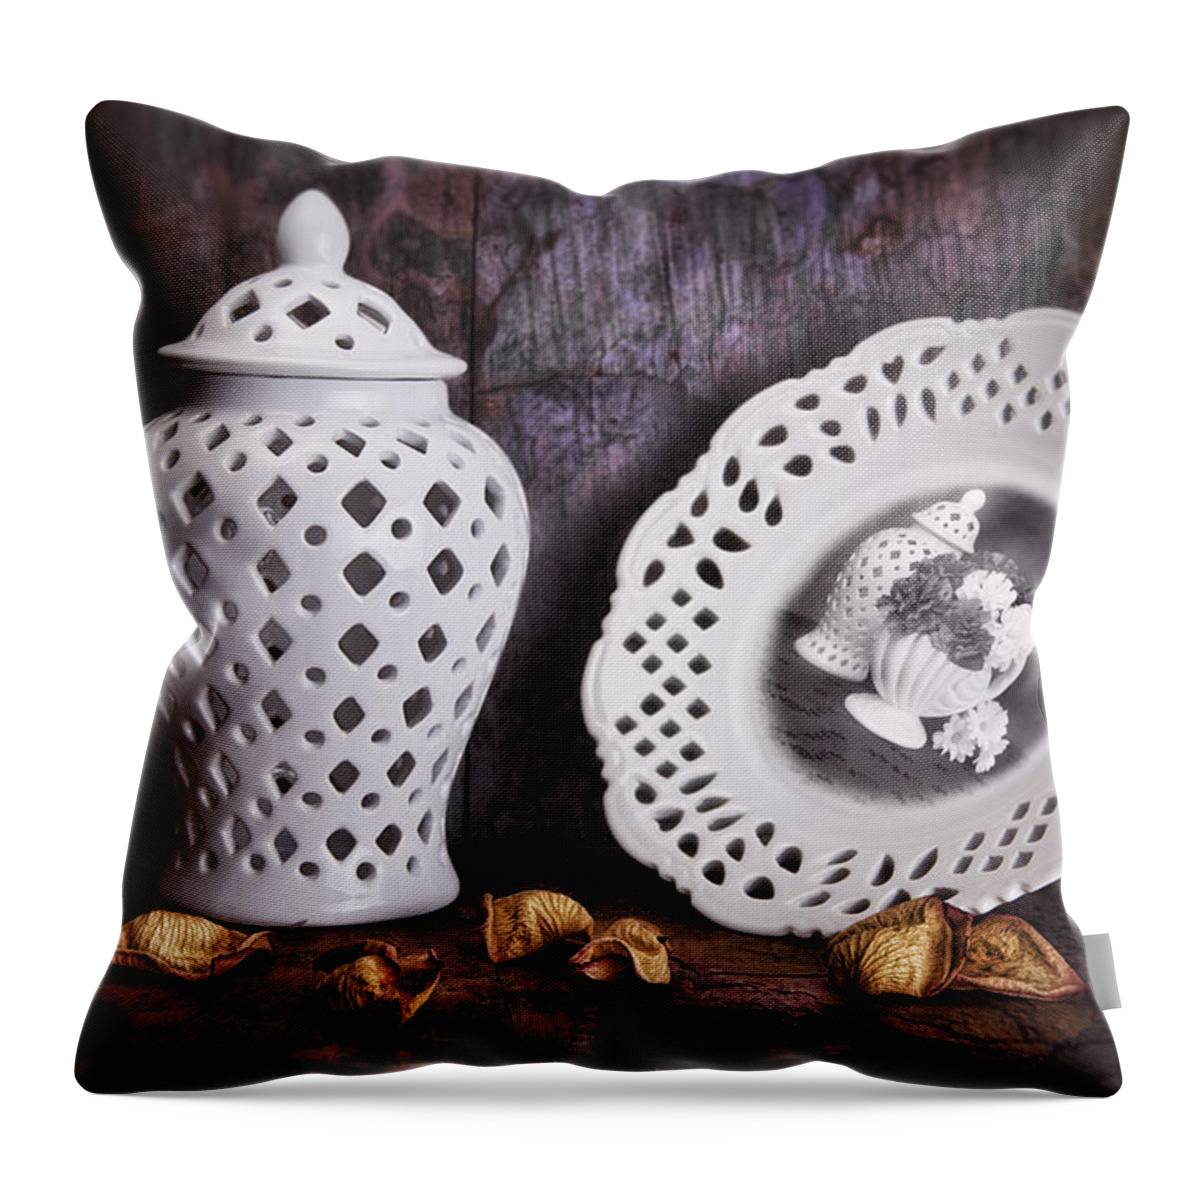 China Throw Pillow featuring the photograph Ginger Jar and Compote Still Life by Tom Mc Nemar